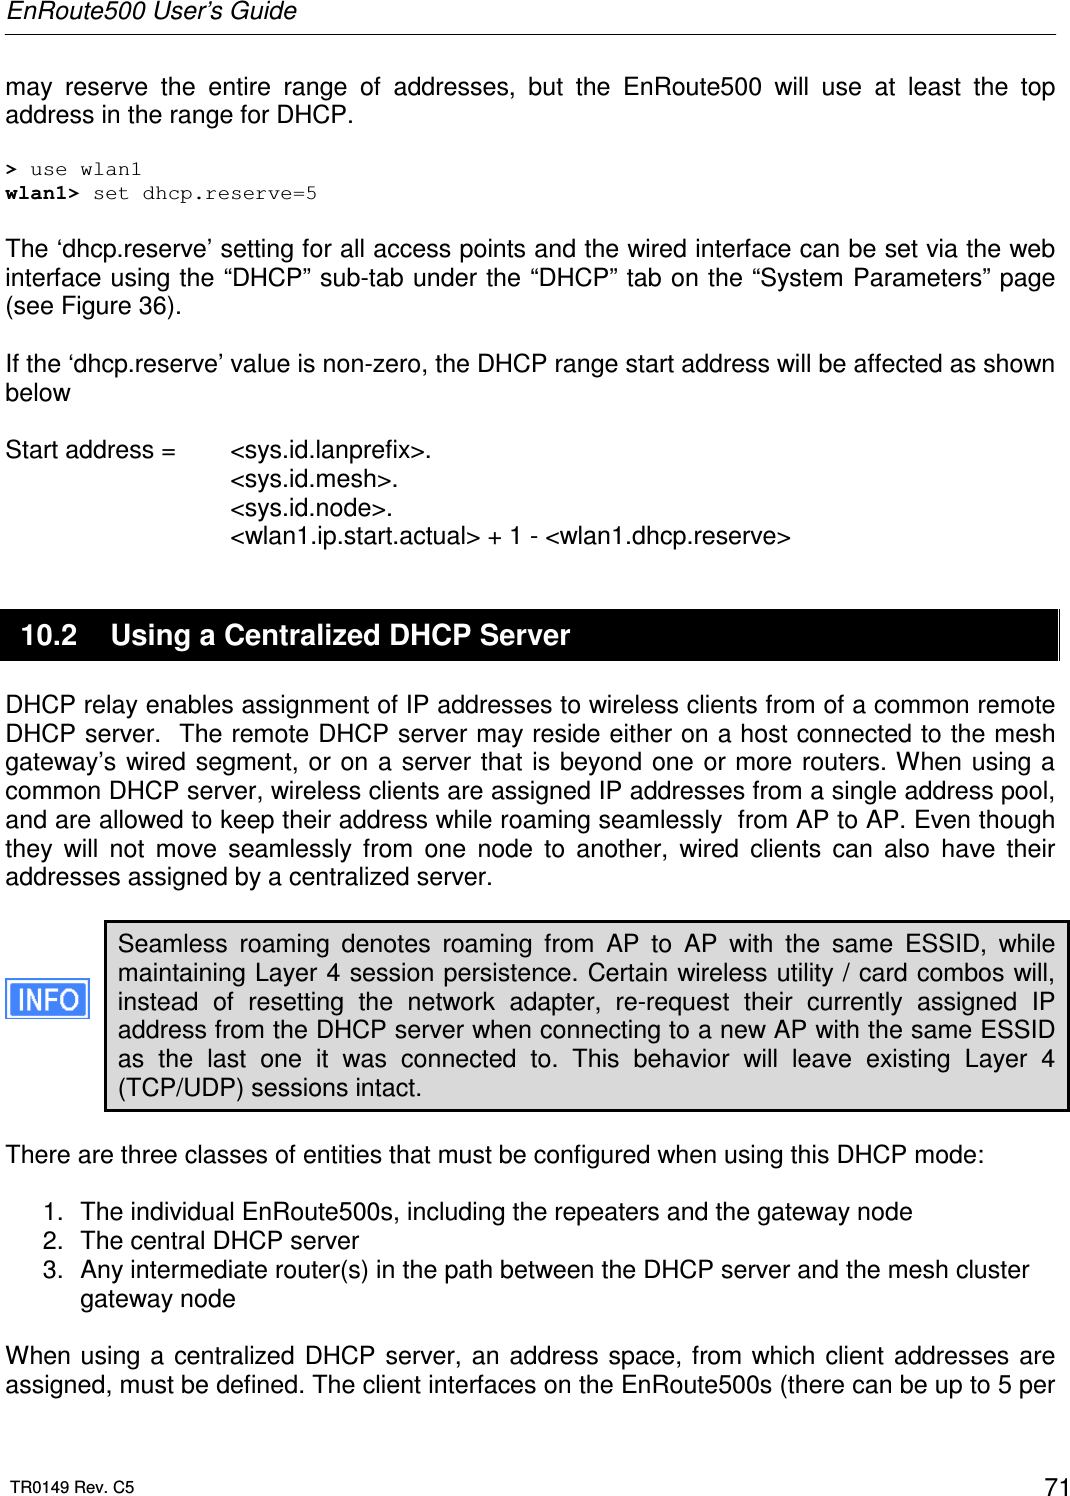 EnRoute500 User’s Guide  TR0149 Rev. C5  71 may  reserve  the  entire  range  of  addresses,  but  the  EnRoute500  will  use  at  least  the  top address in the range for DHCP.  &gt; use wlan1 wlan1&gt; set dhcp.reserve=5  The ‘dhcp.reserve’ setting for all access points and the wired interface can be set via the web interface using the “DHCP” sub-tab under the “DHCP” tab on the “System Parameters” page (see Figure 36).   If the ‘dhcp.reserve’ value is non-zero, the DHCP range start address will be affected as shown below  Start address =   &lt;sys.id.lanprefix&gt;. &lt;sys.id.mesh&gt;. &lt;sys.id.node&gt;. &lt;wlan1.ip.start.actual&gt; + 1 - &lt;wlan1.dhcp.reserve&gt; 10.2  Using a Centralized DHCP Server DHCP relay enables assignment of IP addresses to wireless clients from of a common remote DHCP server.  The remote DHCP server may reside either on a host connected to the mesh gateway’s wired segment, or on a  server that is beyond one or more routers. When using a common DHCP server, wireless clients are assigned IP addresses from a single address pool, and are allowed to keep their address while roaming seamlessly  from AP to AP. Even though they  will  not  move  seamlessly  from  one  node  to  another,  wired  clients  can  also  have  their addresses assigned by a centralized server.  Seamless  roaming  denotes  roaming  from  AP  to  AP  with  the  same  ESSID,  while maintaining Layer 4 session persistence. Certain wireless utility / card combos will, instead  of  resetting  the  network  adapter,  re-request  their  currently  assigned  IP address from the DHCP server when connecting to a new AP with the same ESSID as  the  last  one  it  was  connected  to.  This  behavior  will  leave  existing  Layer  4 (TCP/UDP) sessions intact.  There are three classes of entities that must be configured when using this DHCP mode:  1.  The individual EnRoute500s, including the repeaters and the gateway node 2.  The central DHCP server 3.  Any intermediate router(s) in the path between the DHCP server and the mesh cluster gateway node  When using a  centralized DHCP server, an address  space,  from which client  addresses are assigned, must be defined. The client interfaces on the EnRoute500s (there can be up to 5 per 